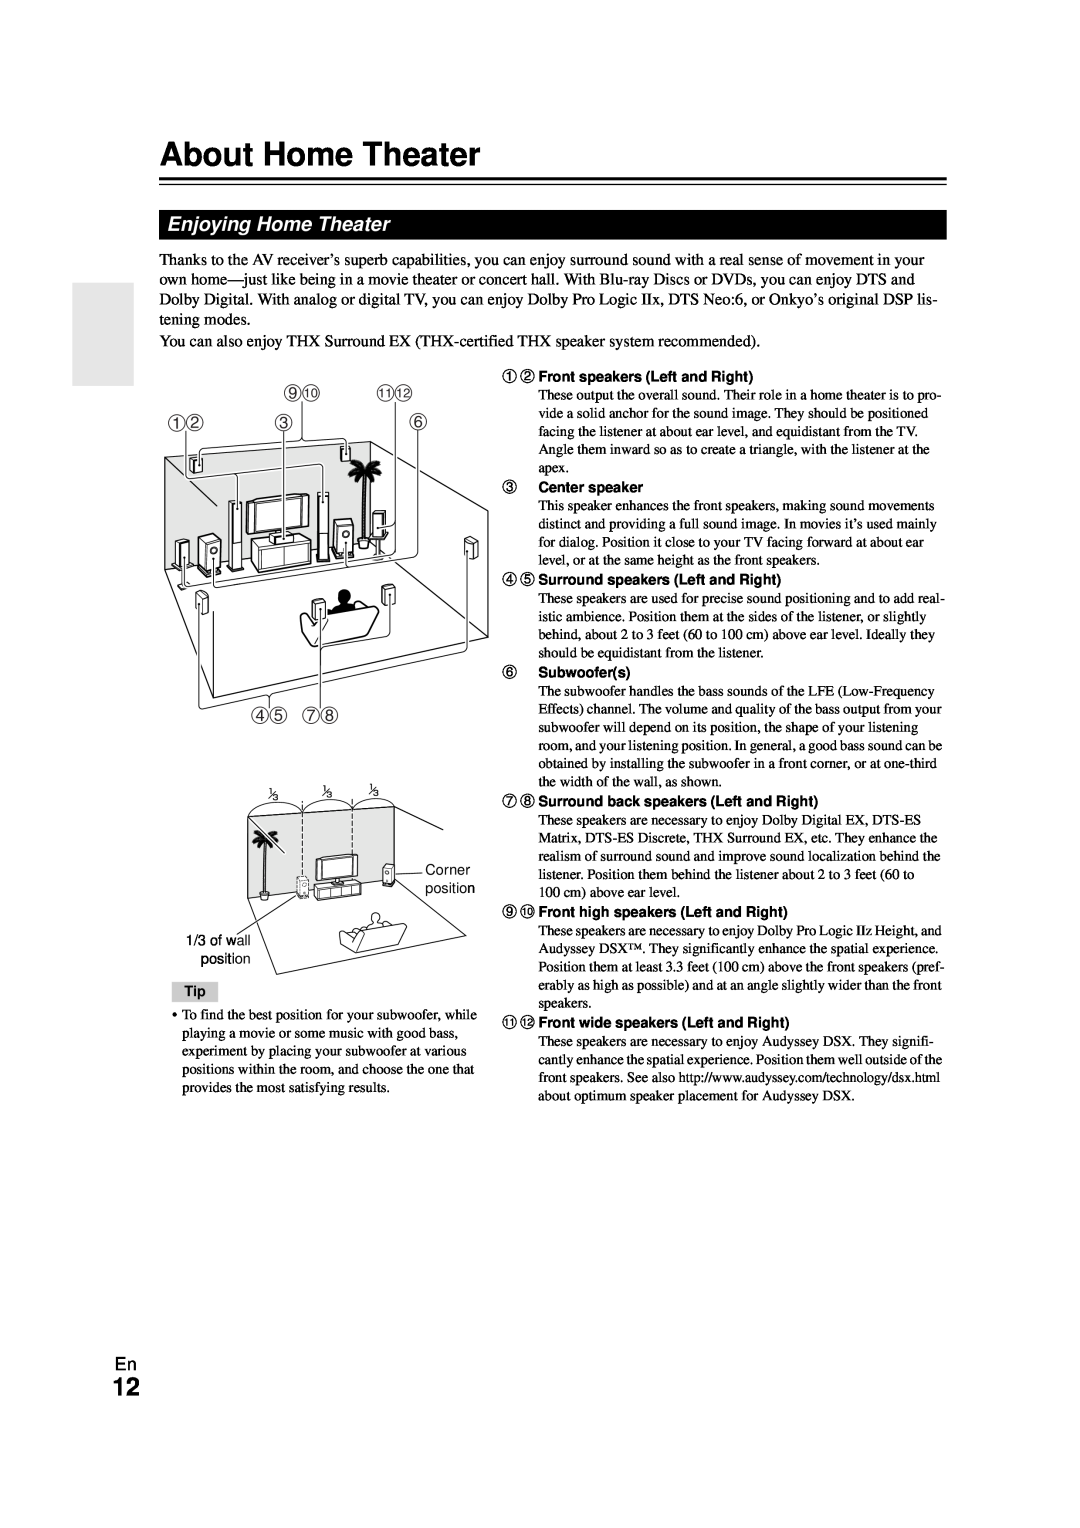 Onkyo HT-RC270 instruction manual About Home Theater, Enjoying Home Theater, ij kl, de gh 